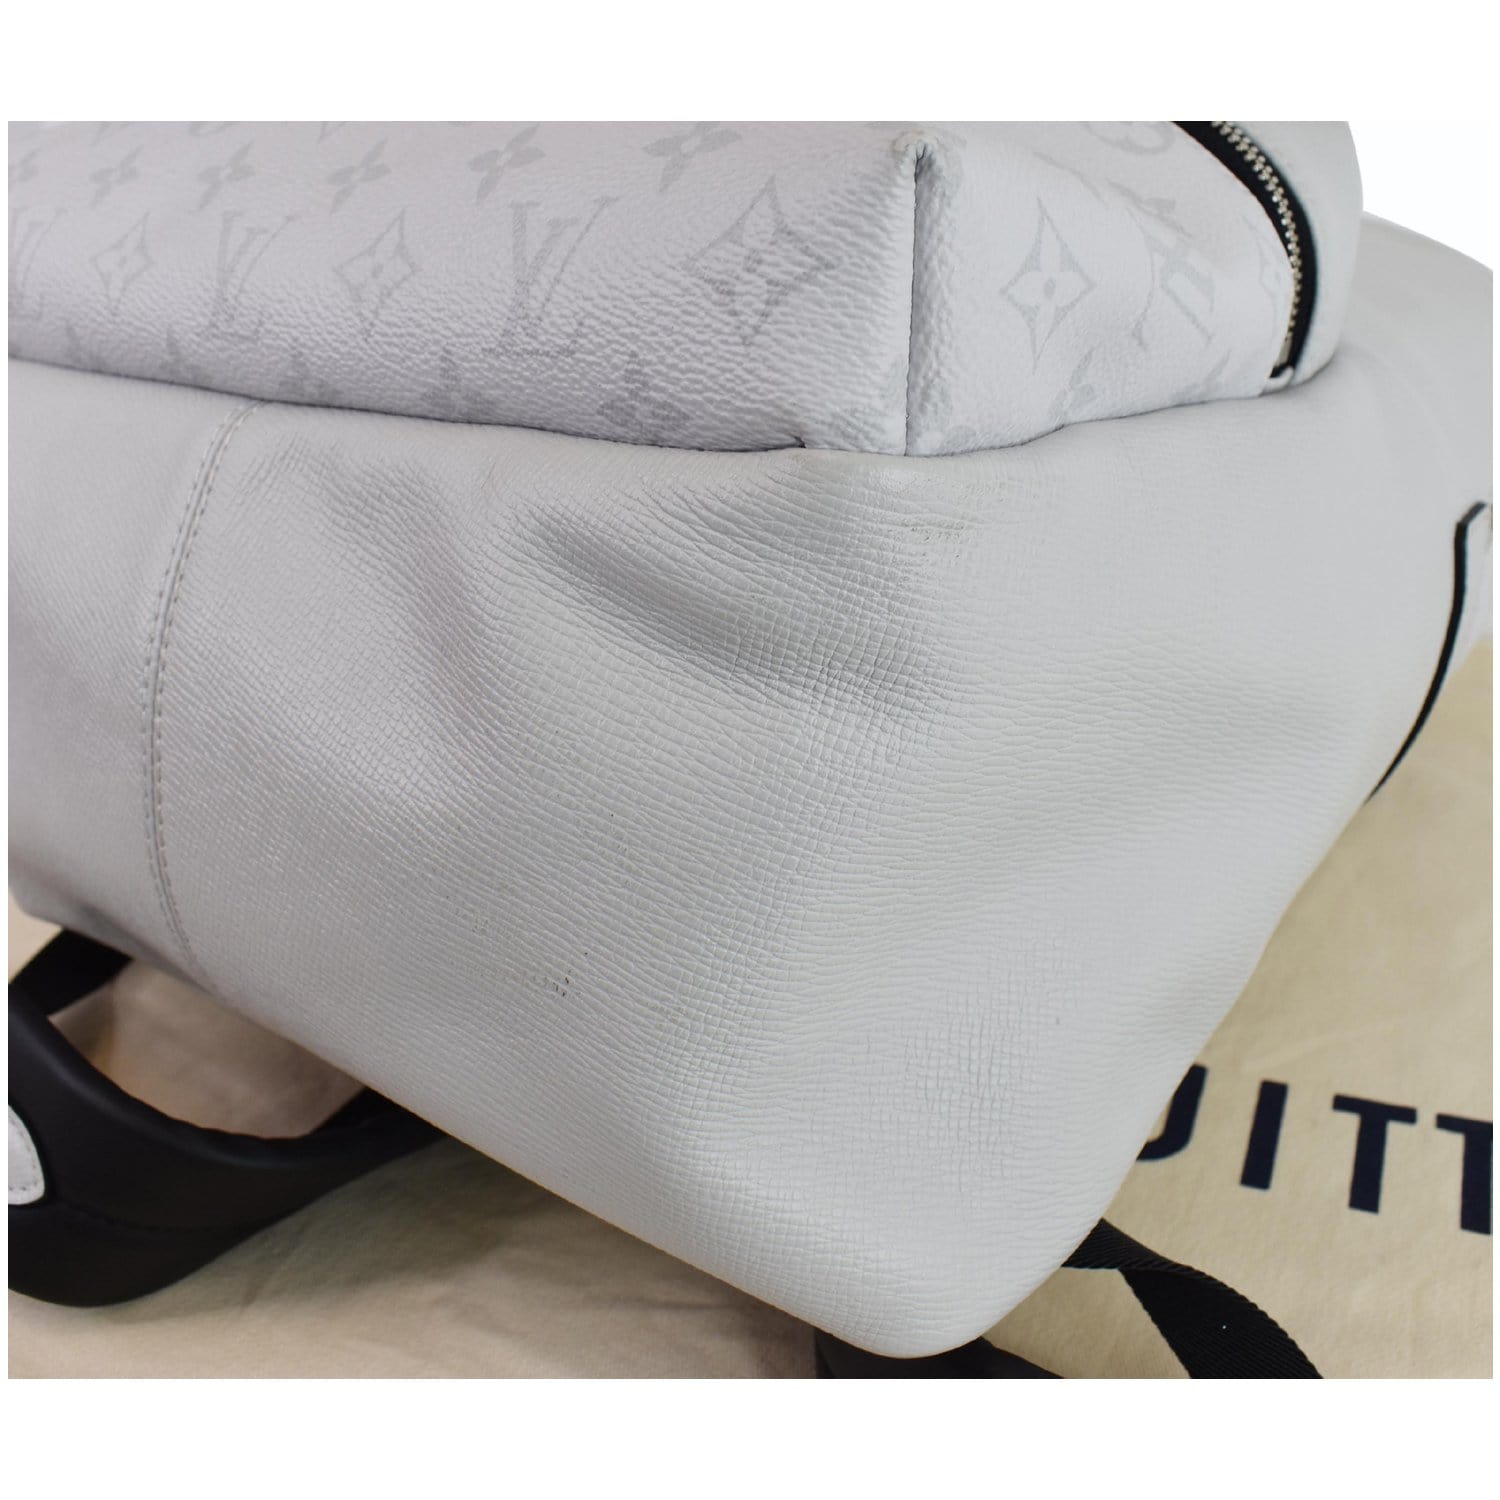 LOUIS VUITTON Taiga Monogram Discovery Backpack PM White 1185811